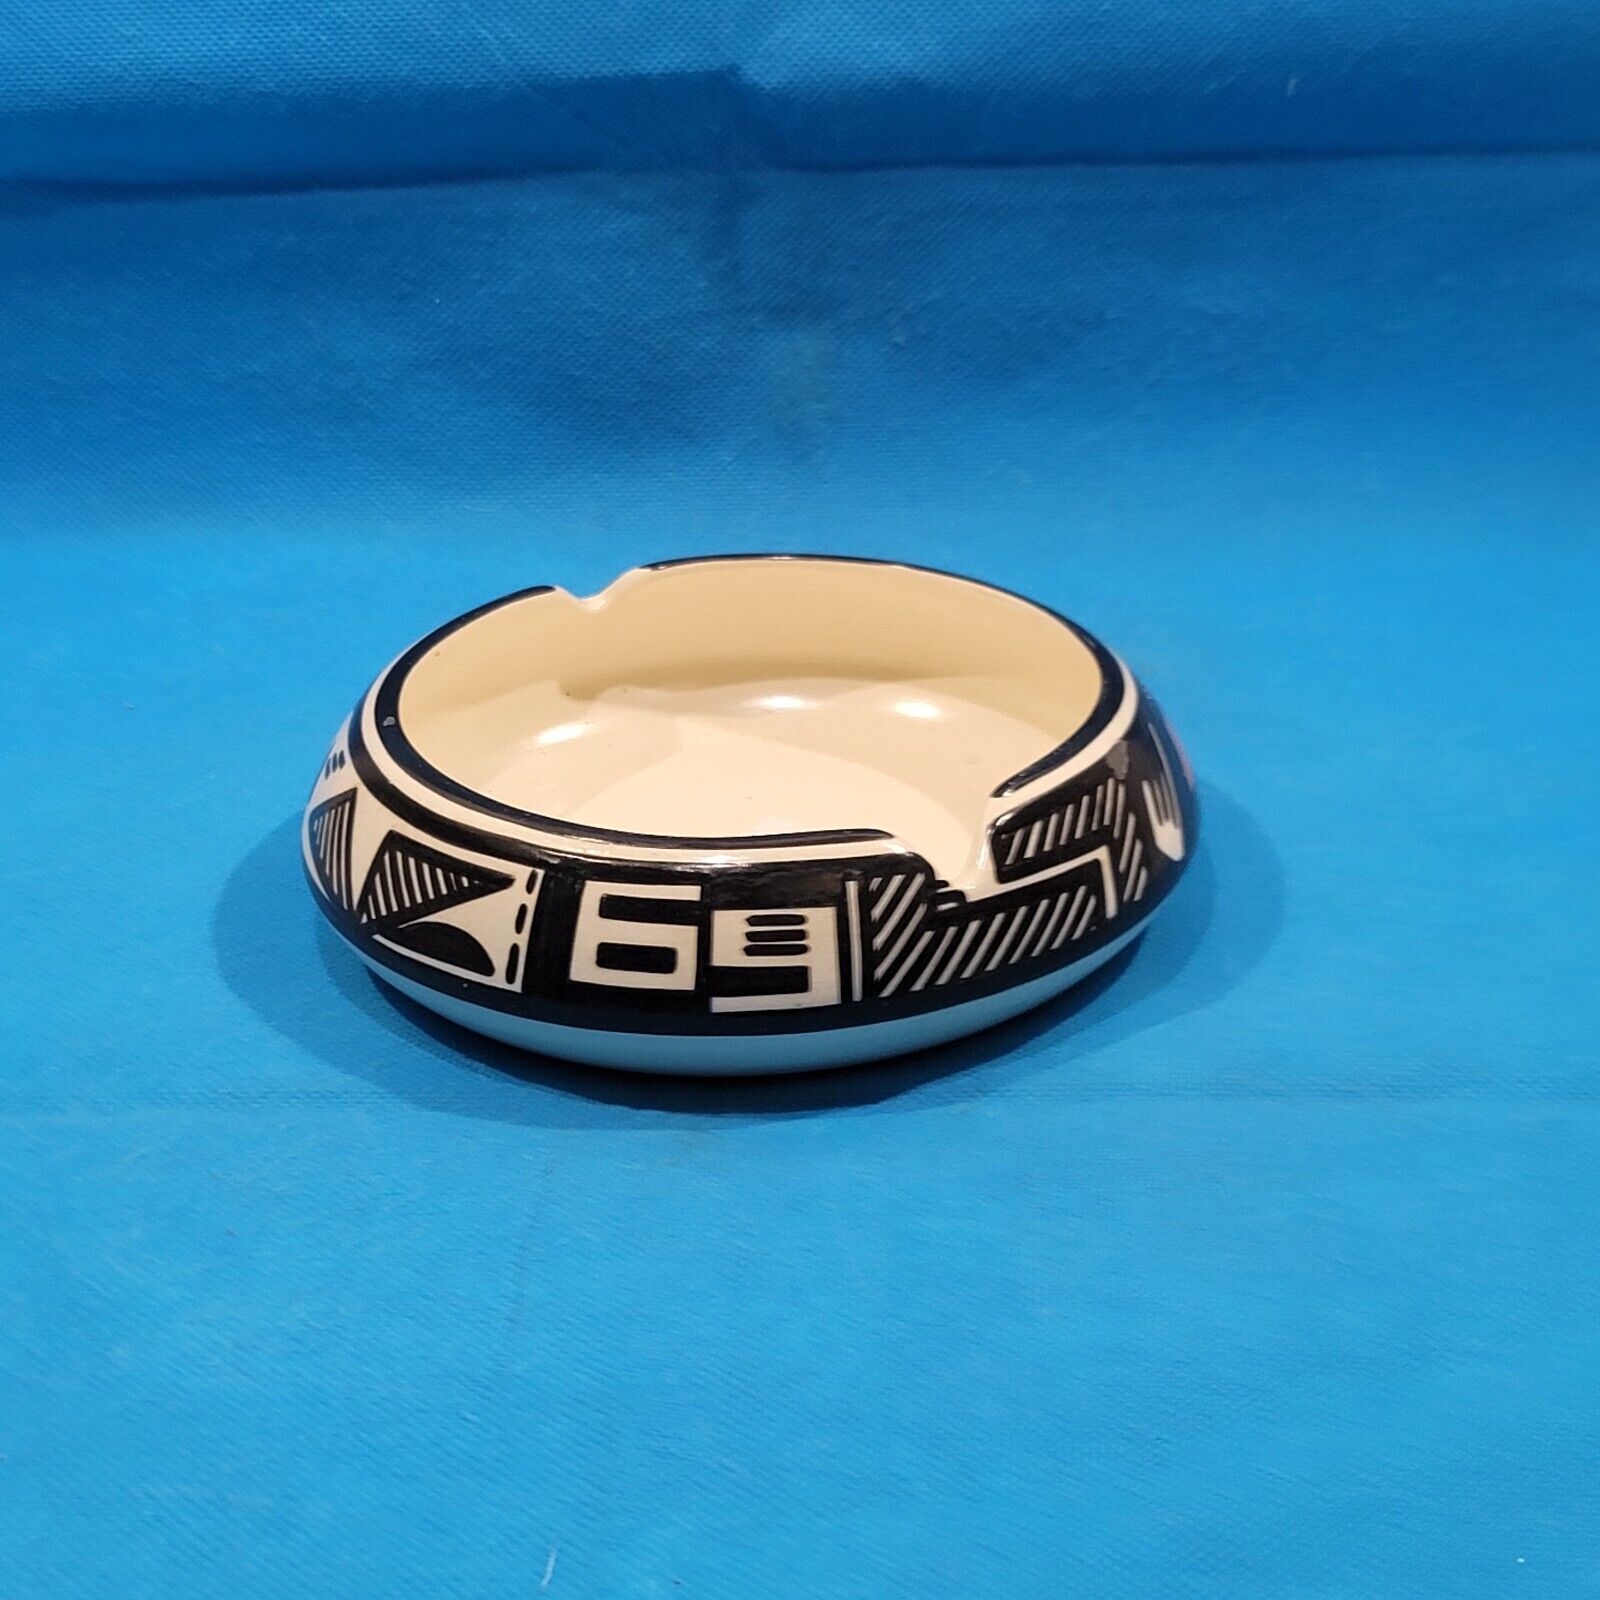 Vintage Navajo Crafted Ashtray Hand Painted Signed Pottery Ceramic